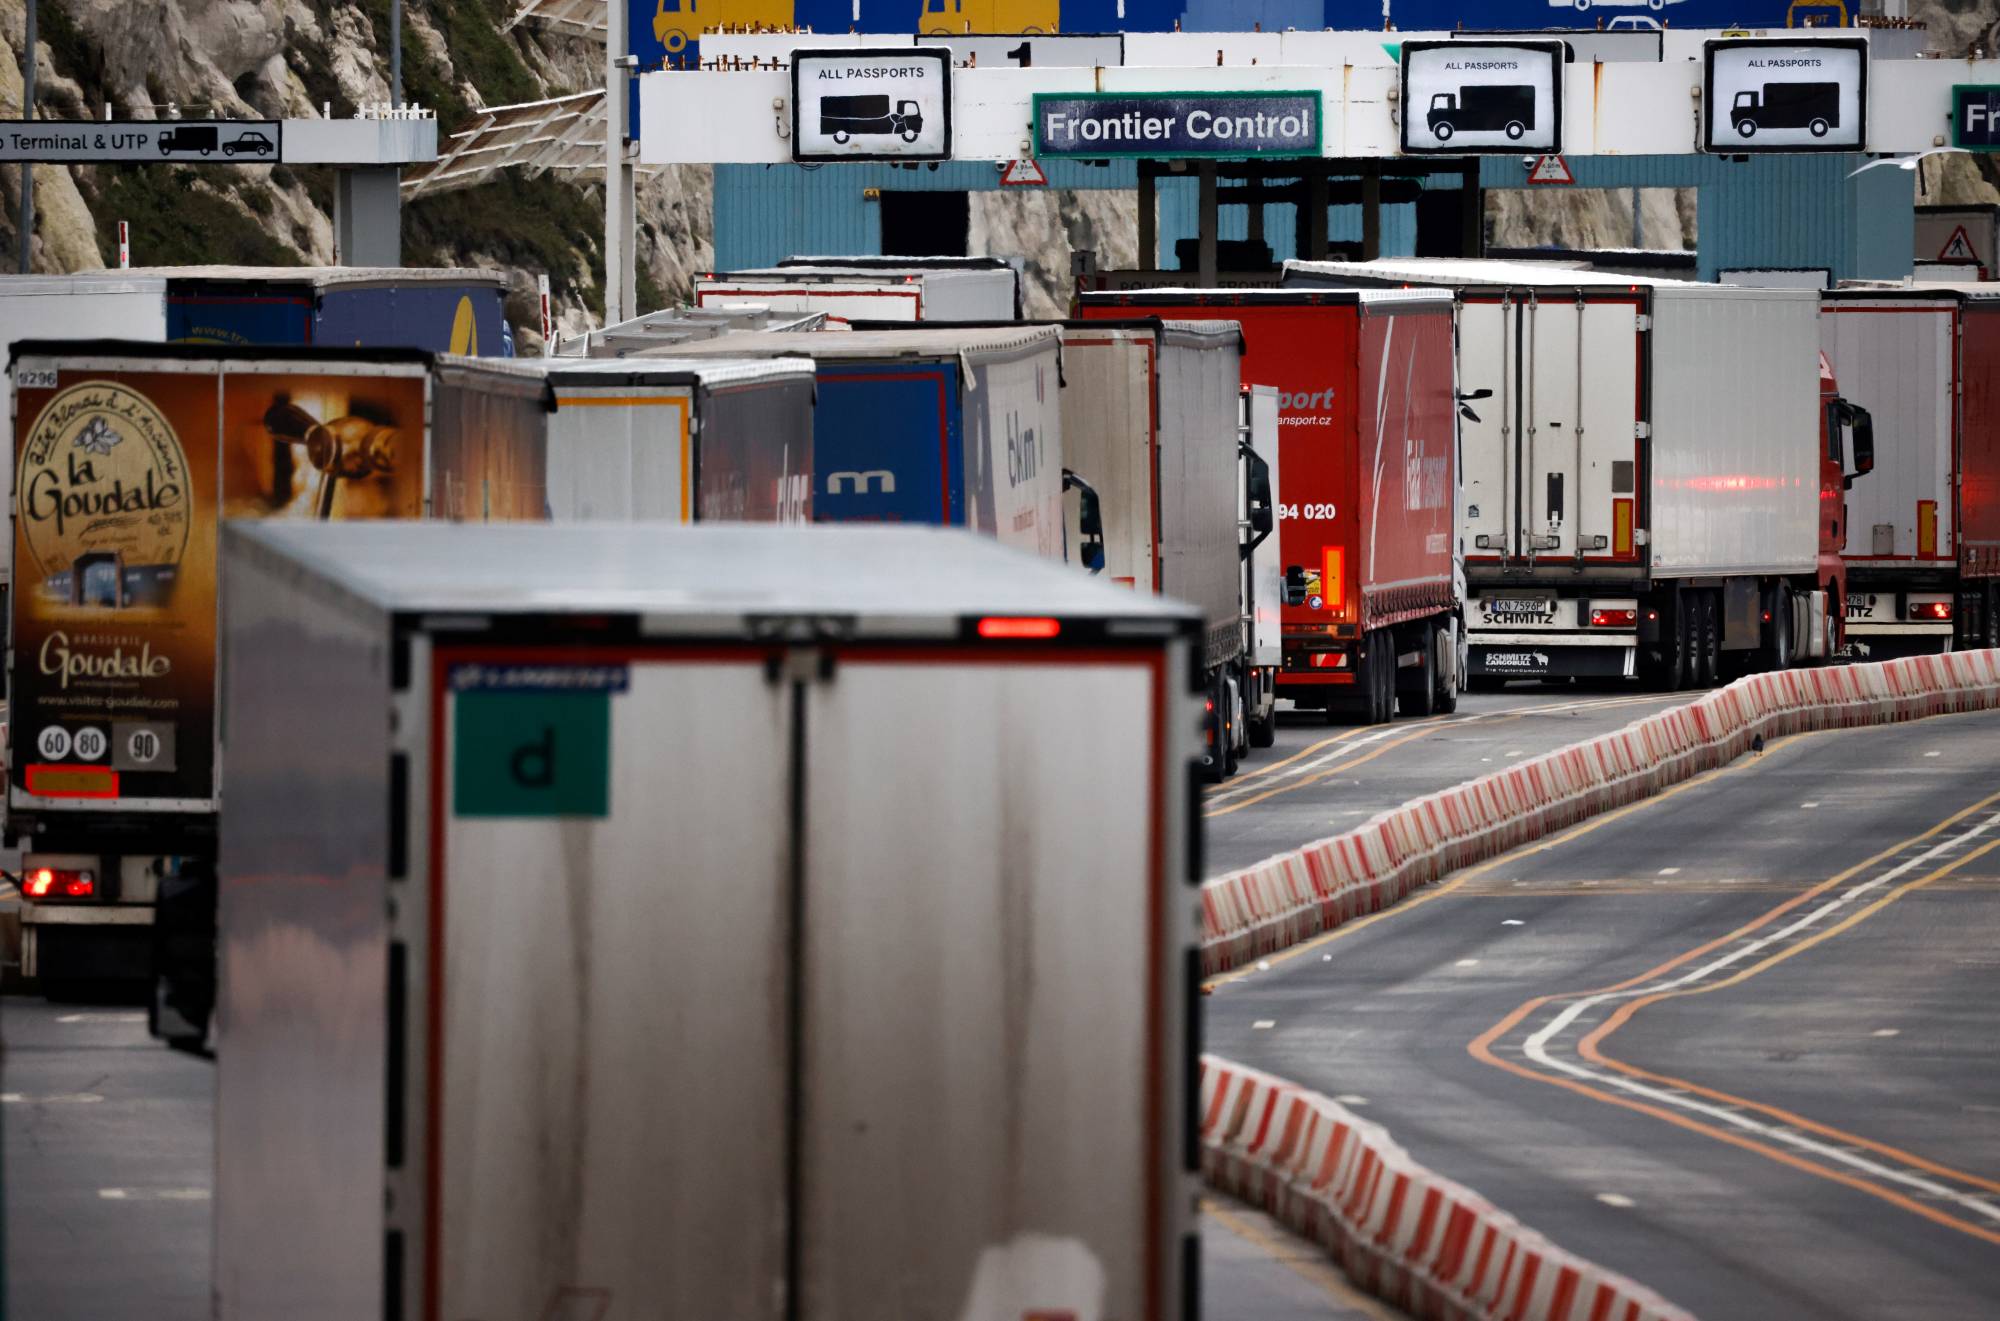 Vehicles queue at border control at the port of Dover after the end of the Brexit transition period, in Dover, Britain, on Jan. 15. Uncertainty over the post-Brexit situation has reduced Japanese firms' presence in the country. | REUTERS